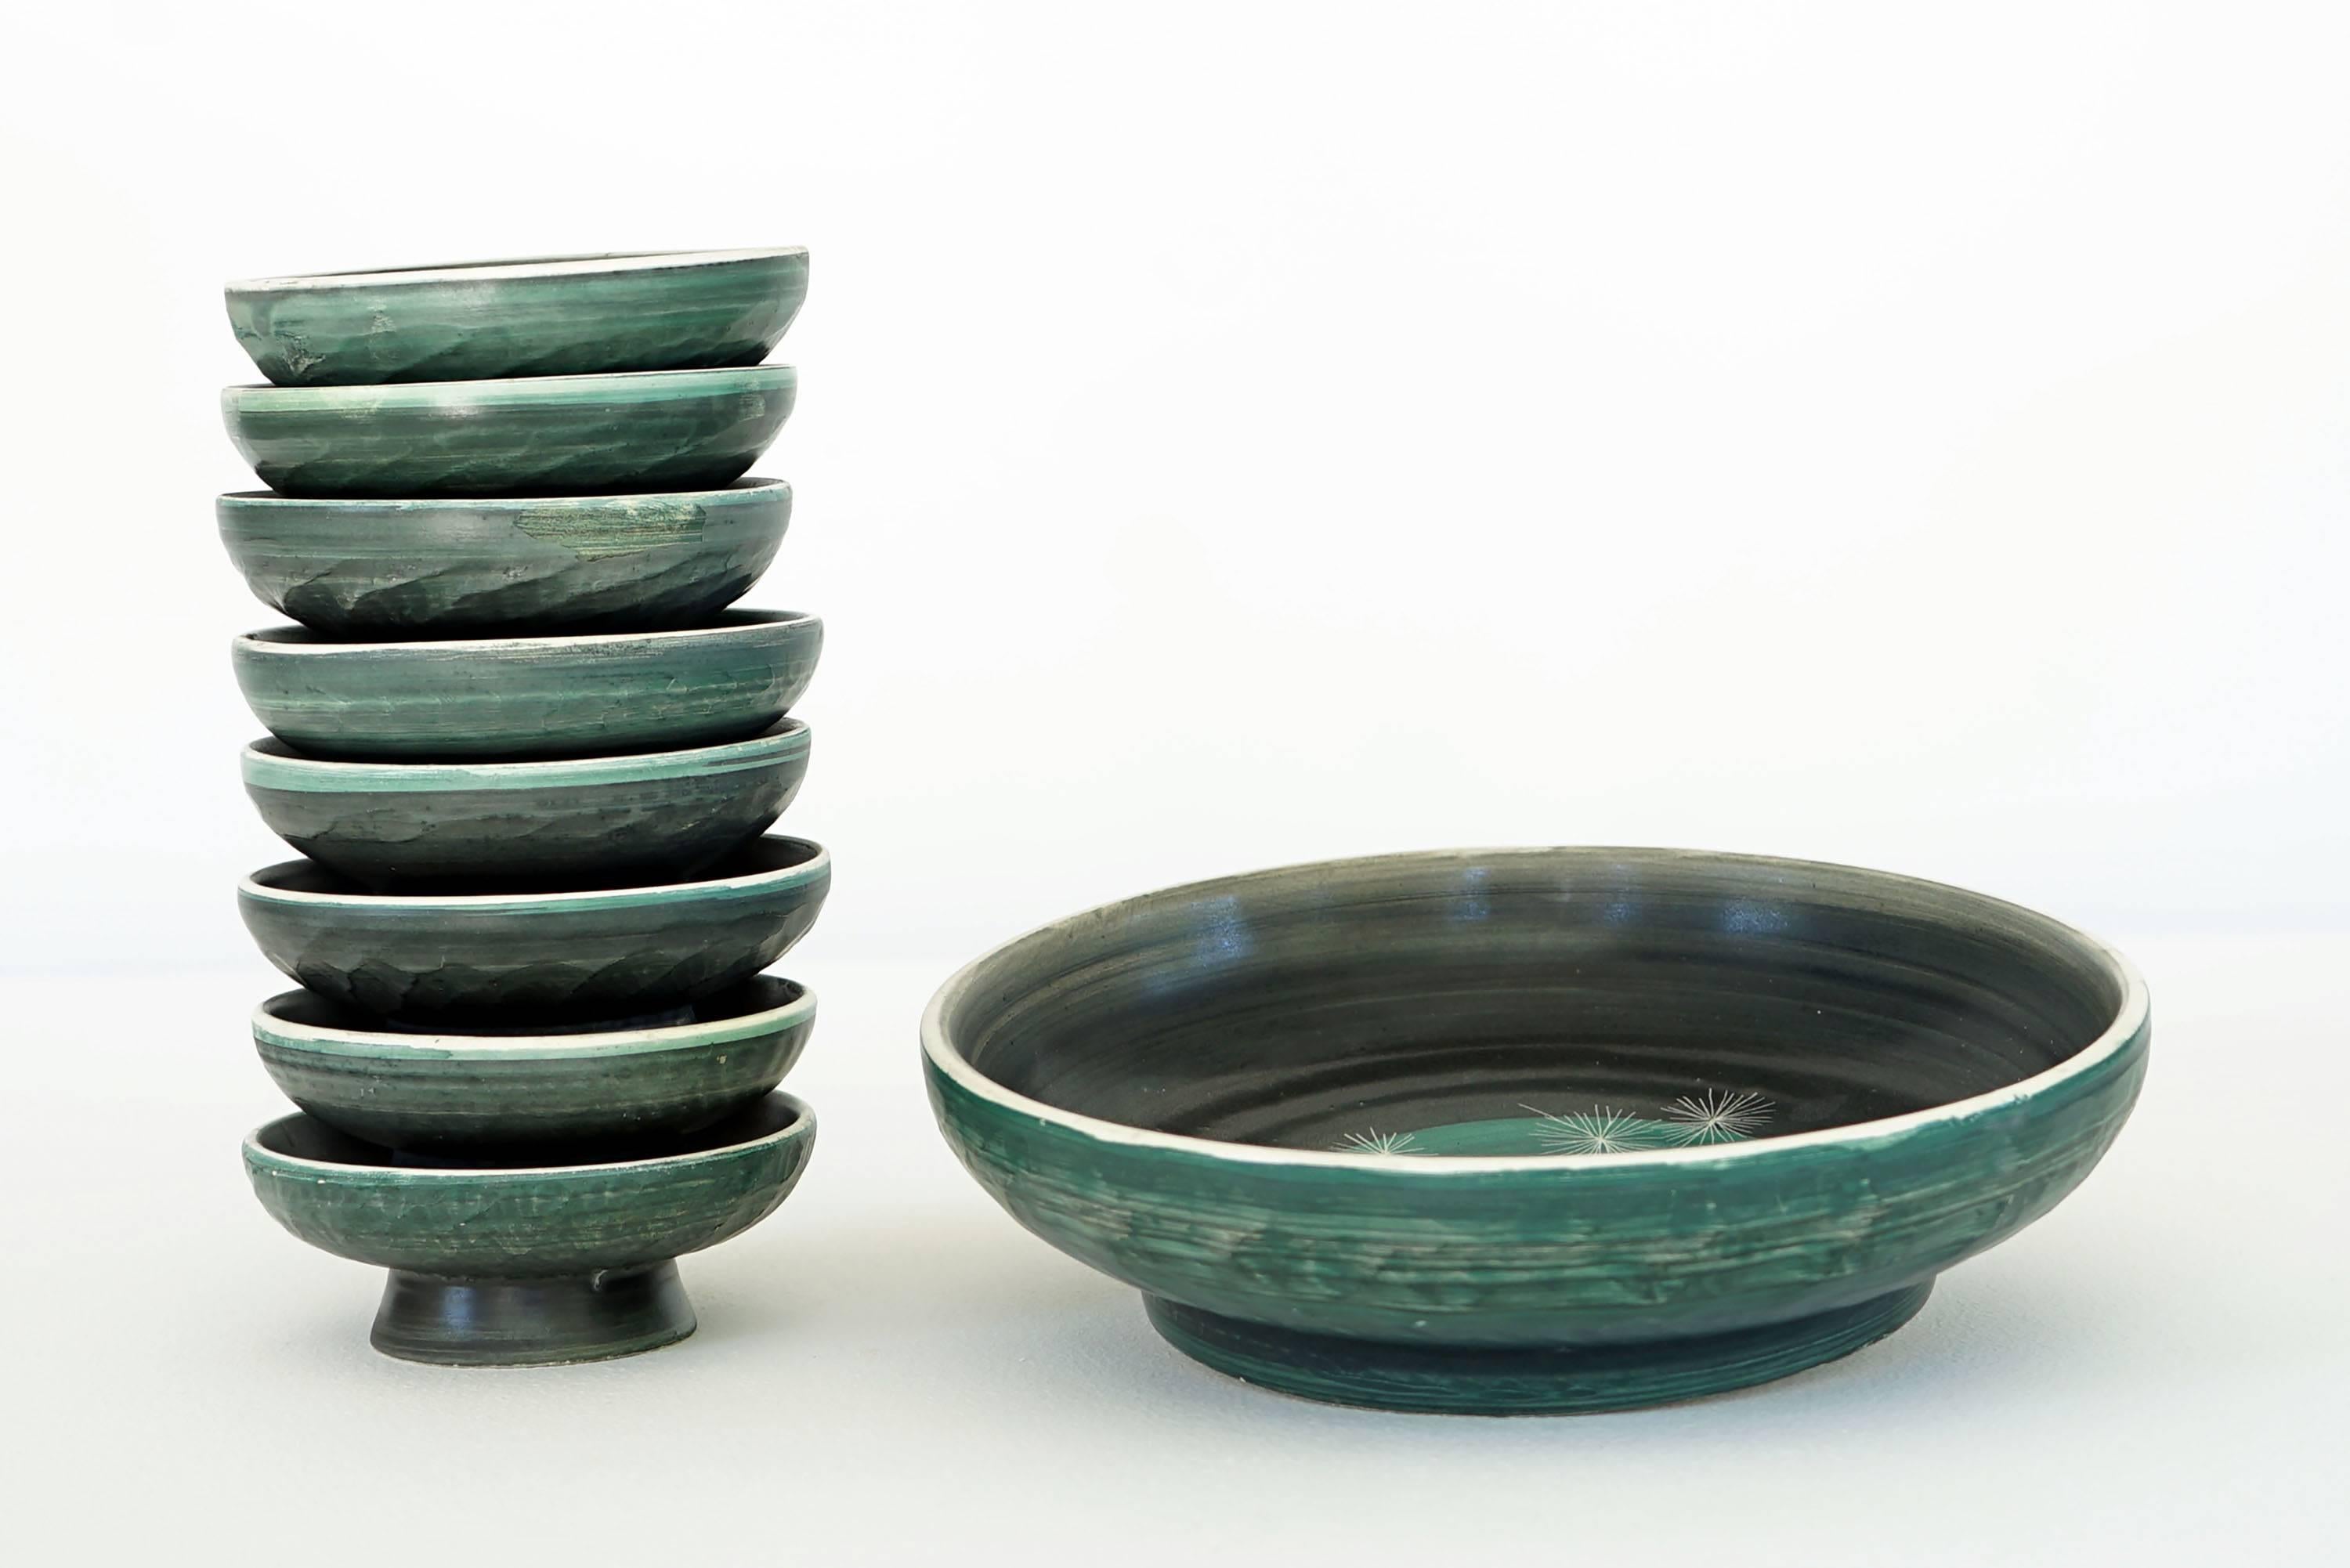 Set of Handmade Ceramic Bowls by Tapis Vert in Vallauris, 1950s For Sale 4